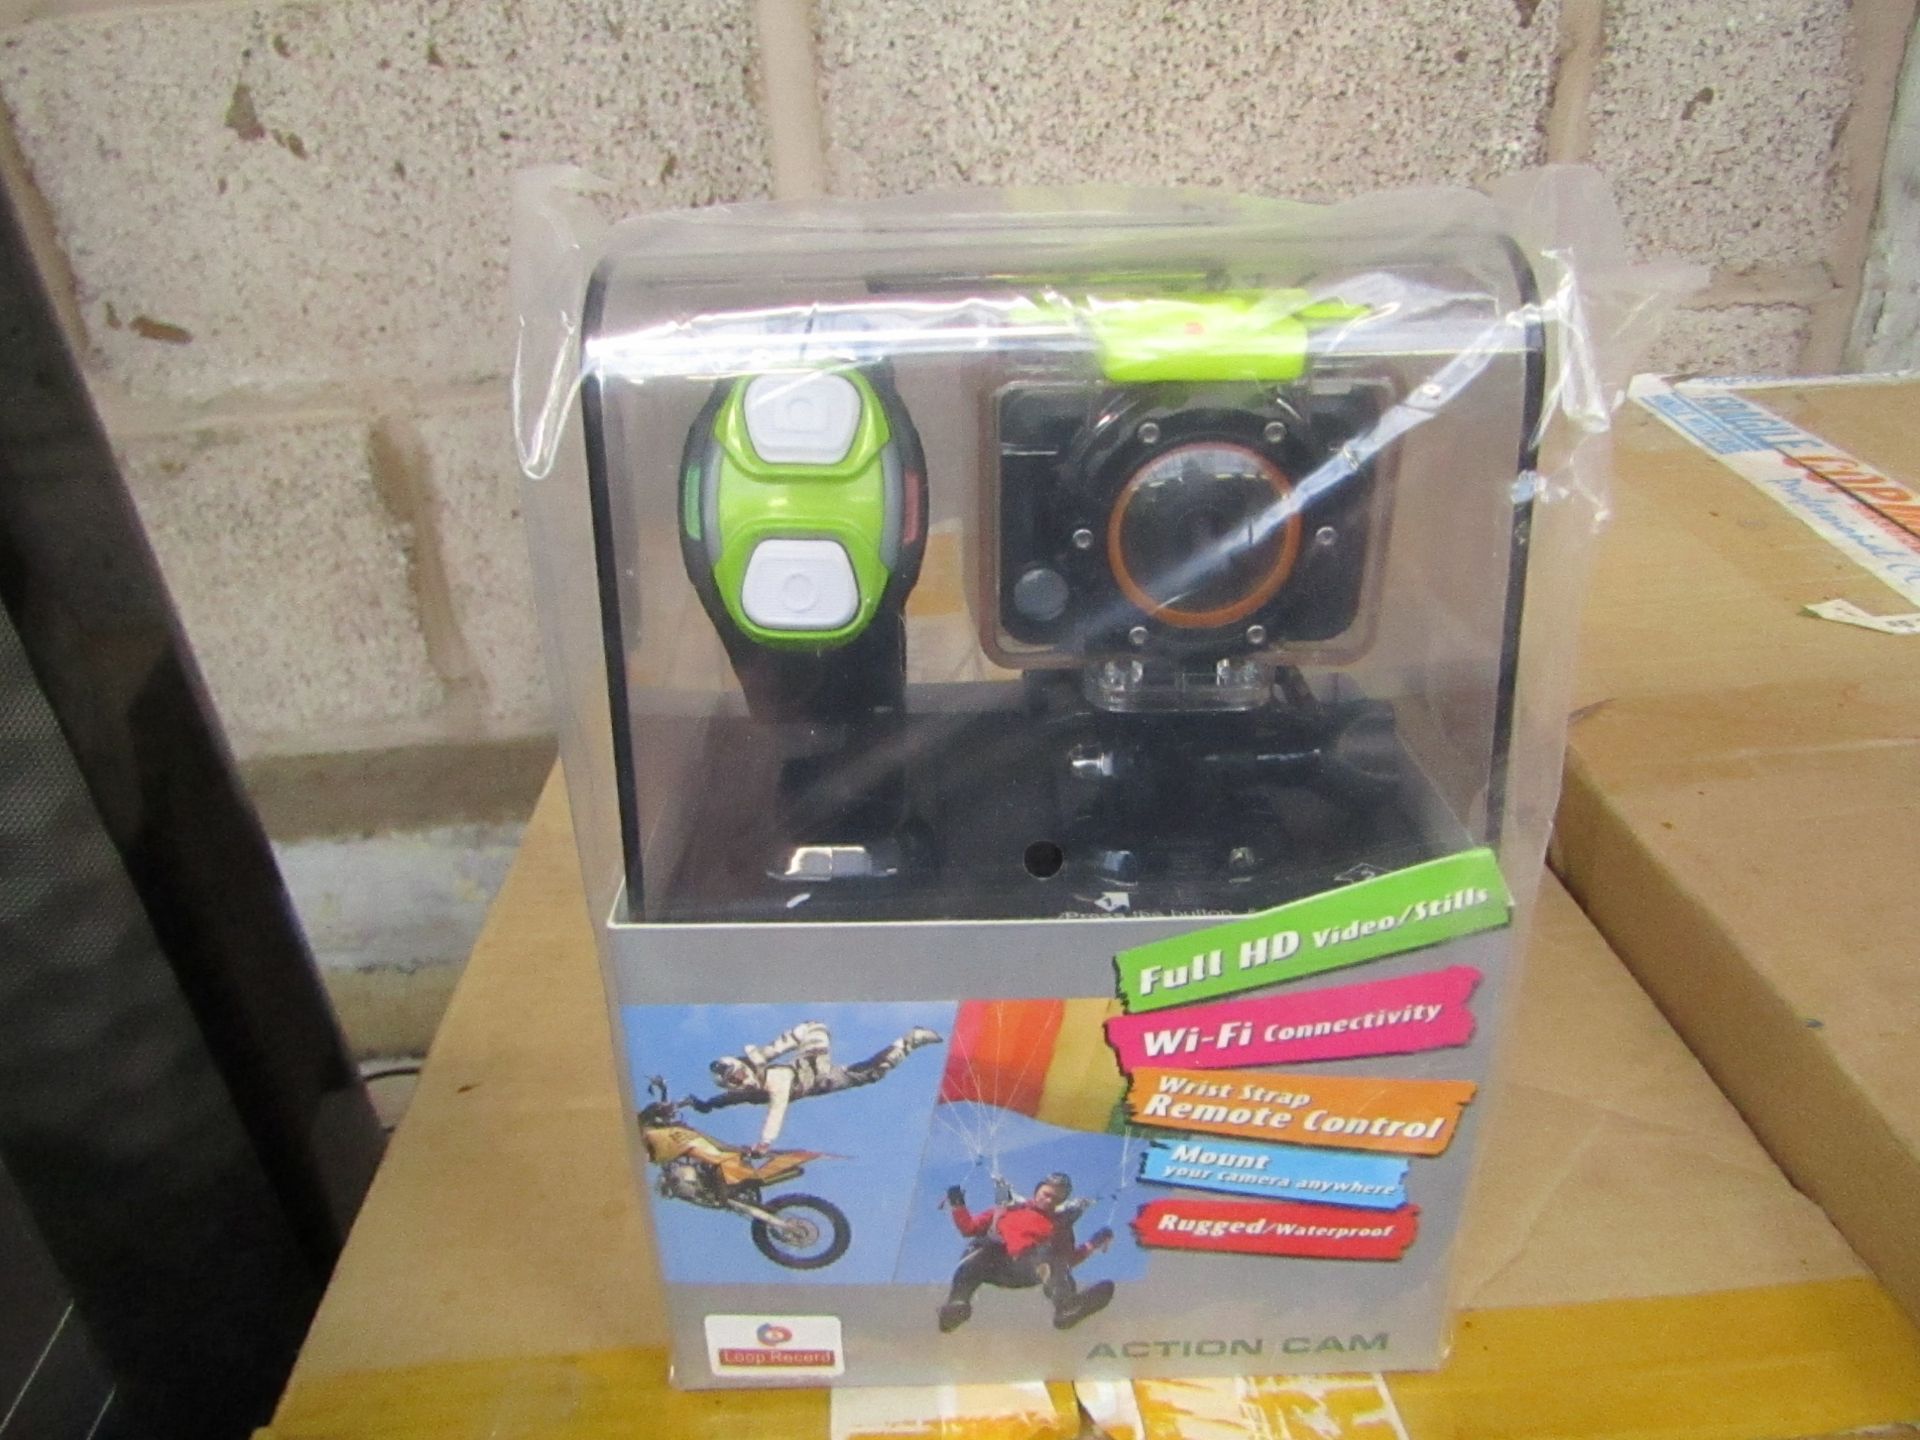 Full HD sports WiFi action camera with accessories and bracelet, tested working and boxed.